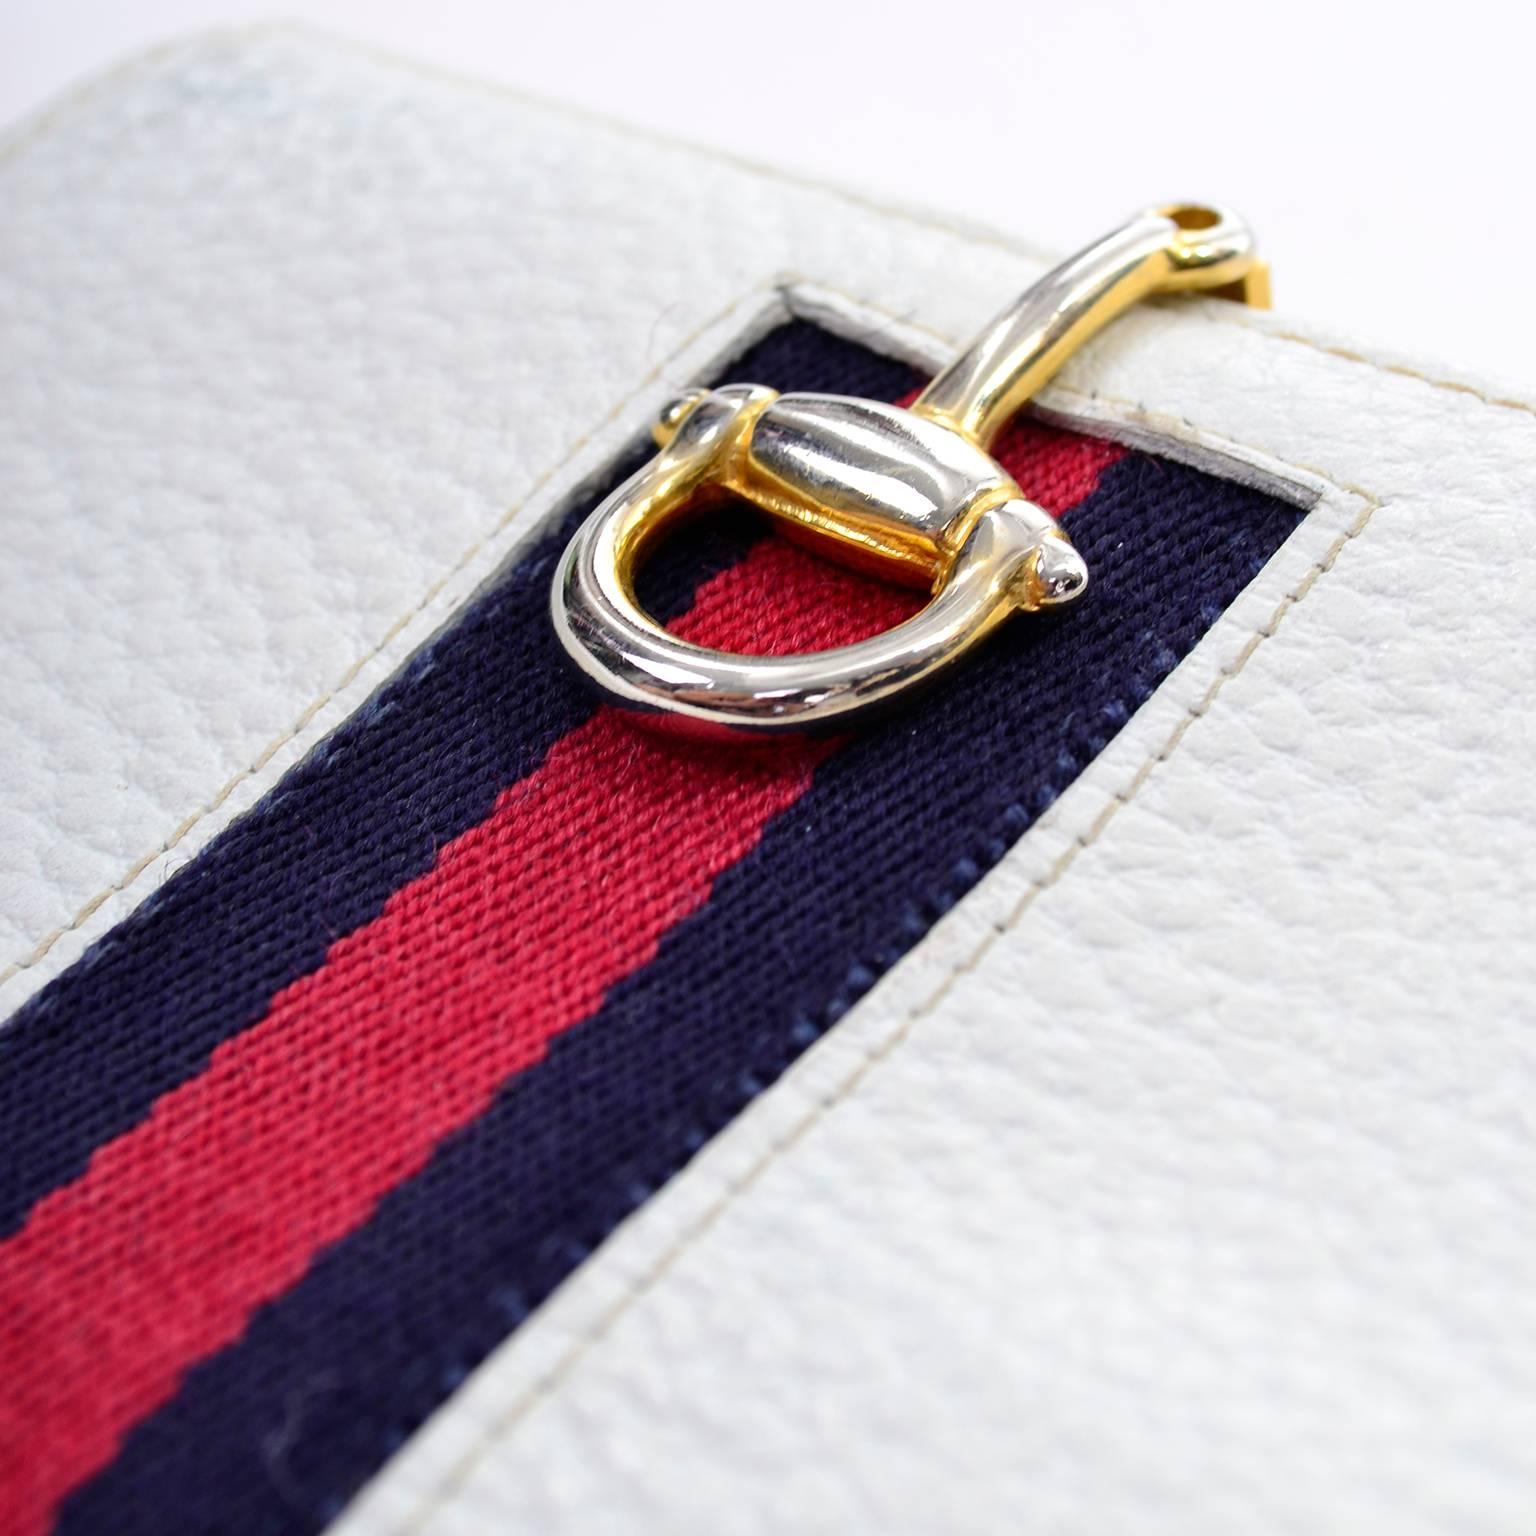 This white leather gucci wallet has gold hardware and blue and red striped trim.  The wallet measures 4 and 5/8 inches by 3 and 5/8 inches and has 2 sections and 4 inside flap pockets.  The wallet measures 7 inches when open flat.  A beautiful